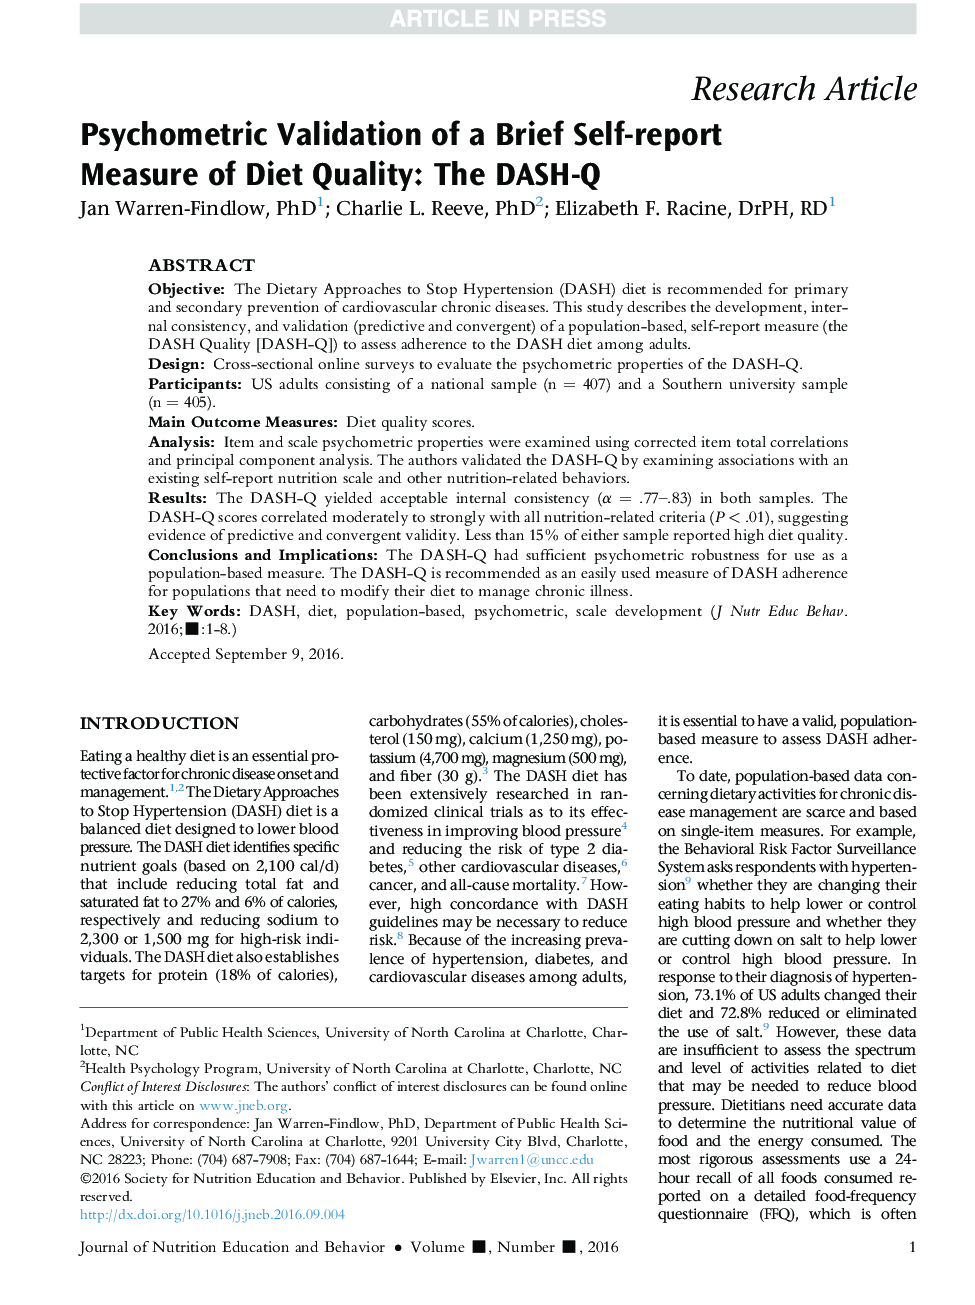 Psychometric Validation of a Brief Self-report Measure of Diet Quality: The DASH-Q